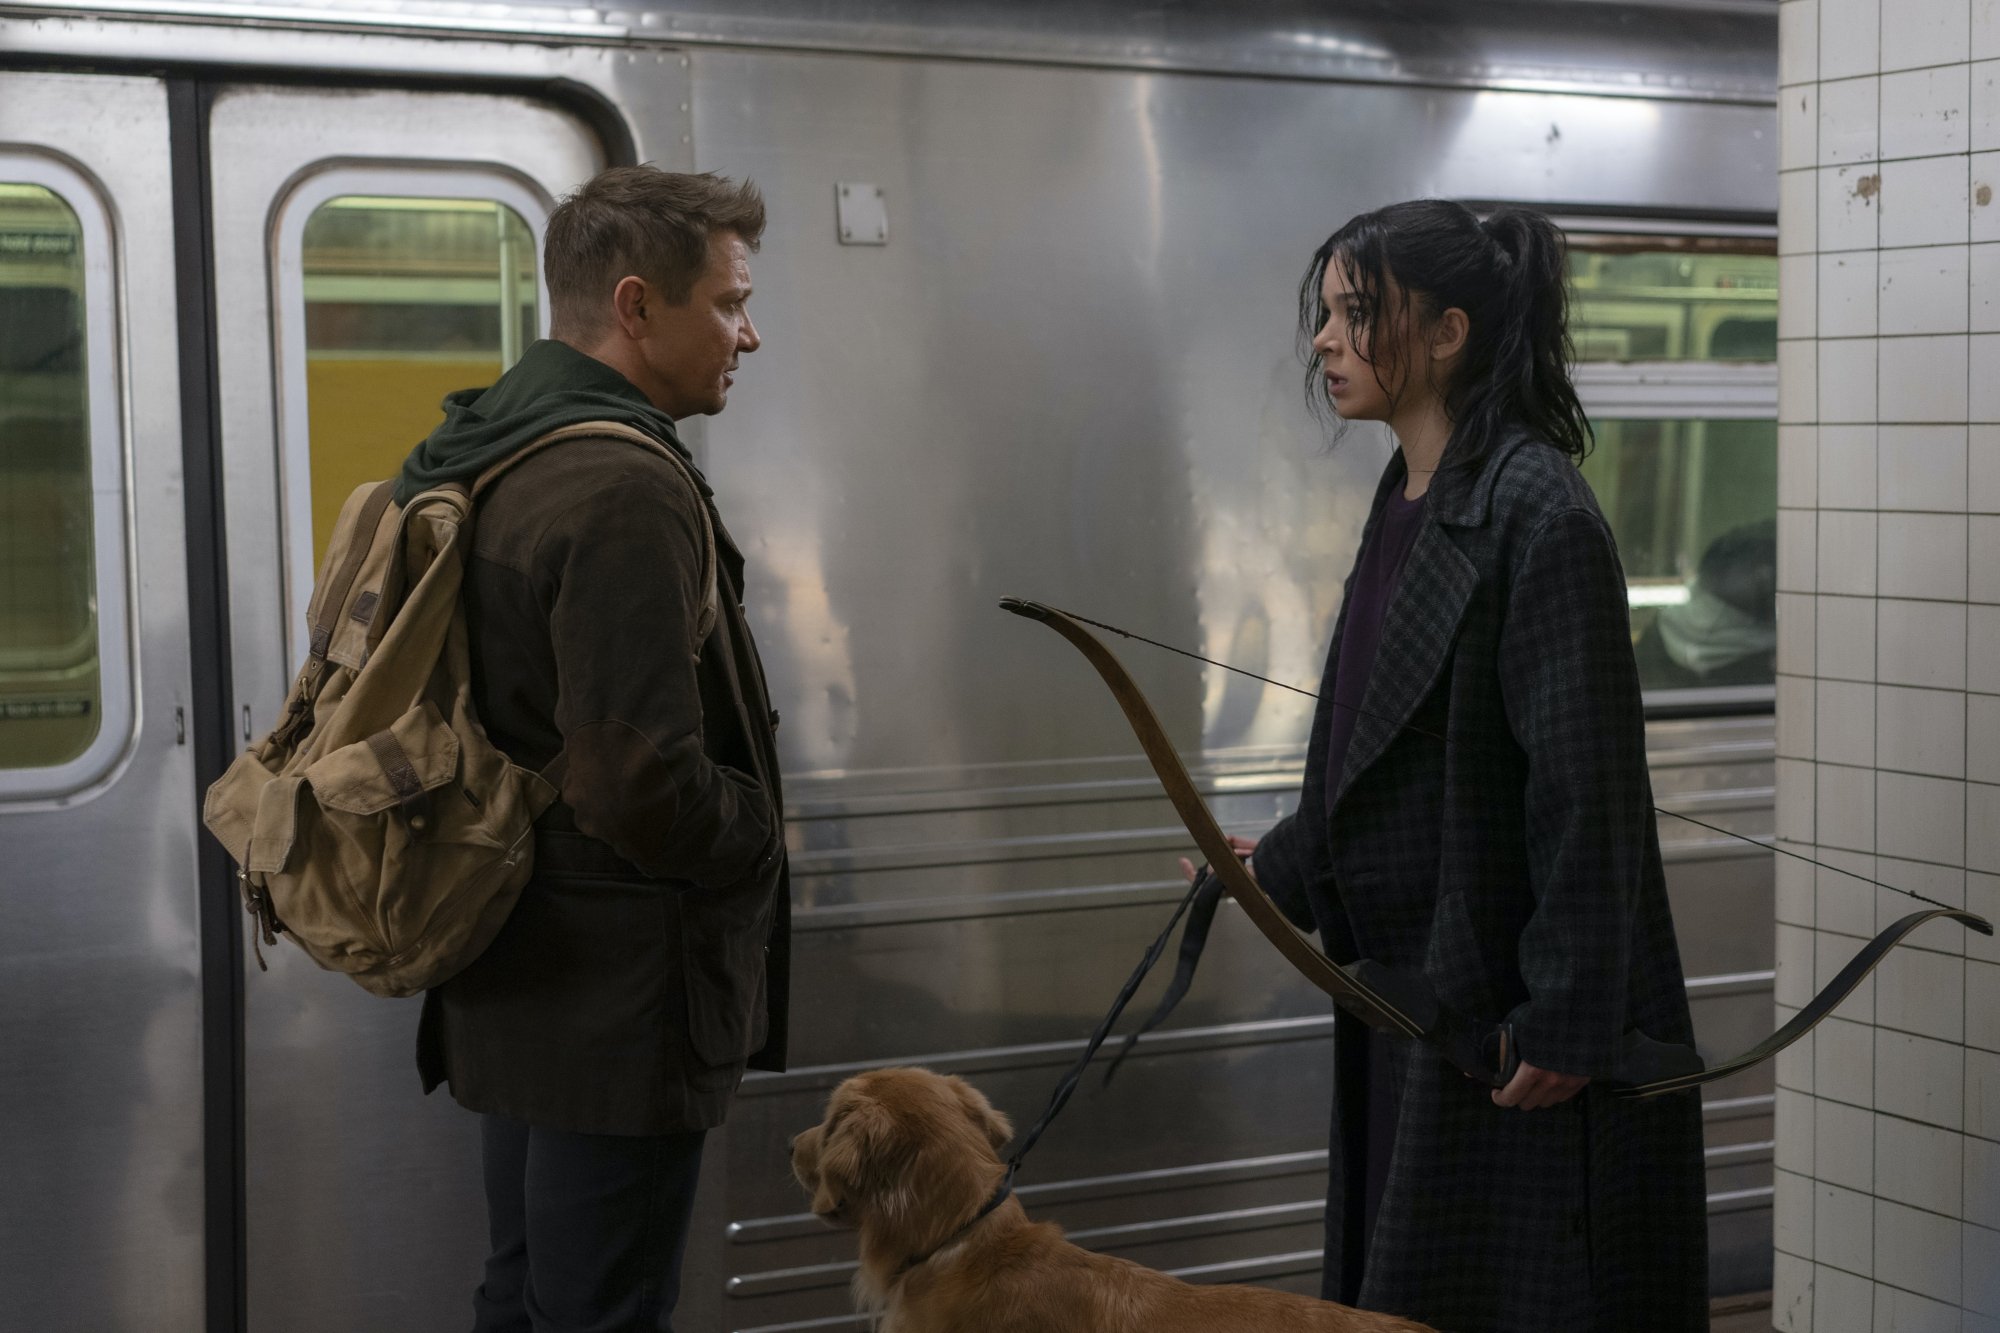 Jeremy Renner as Clint Barton and Hailee Steinfeld as Kate Bishop in Marvel's 'Hawkeye' show. They're standing on the subway and staring at one another.